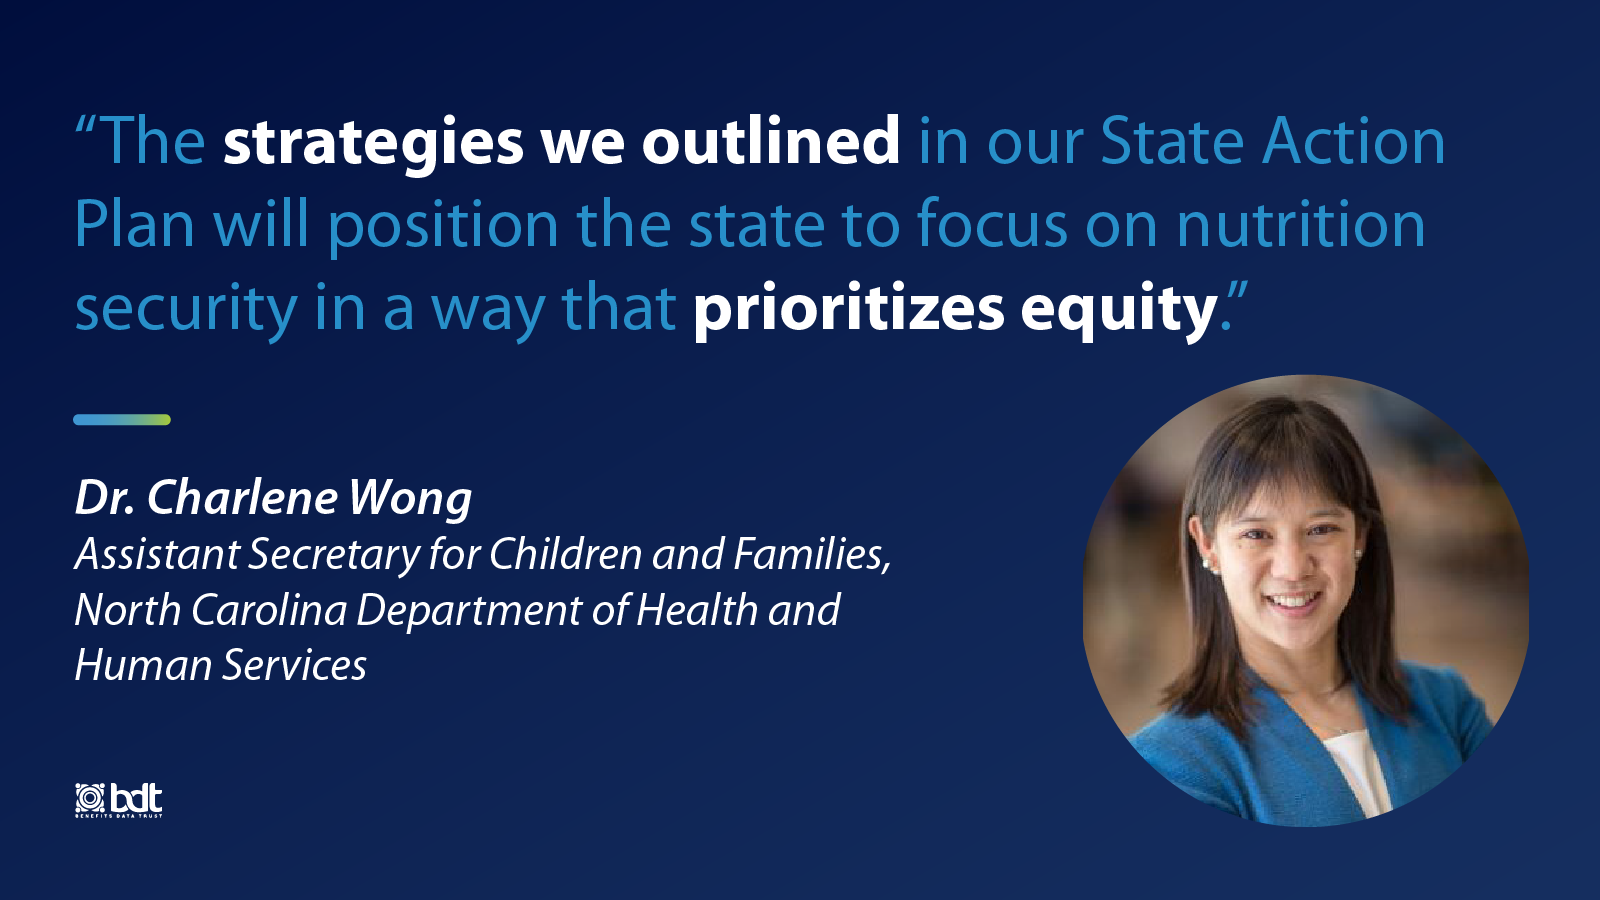 "The strategies we outlined in our State Action Plan will position the state to focus on nutrition security in a way that prioritizes equity." – Dr. Charlene Wong